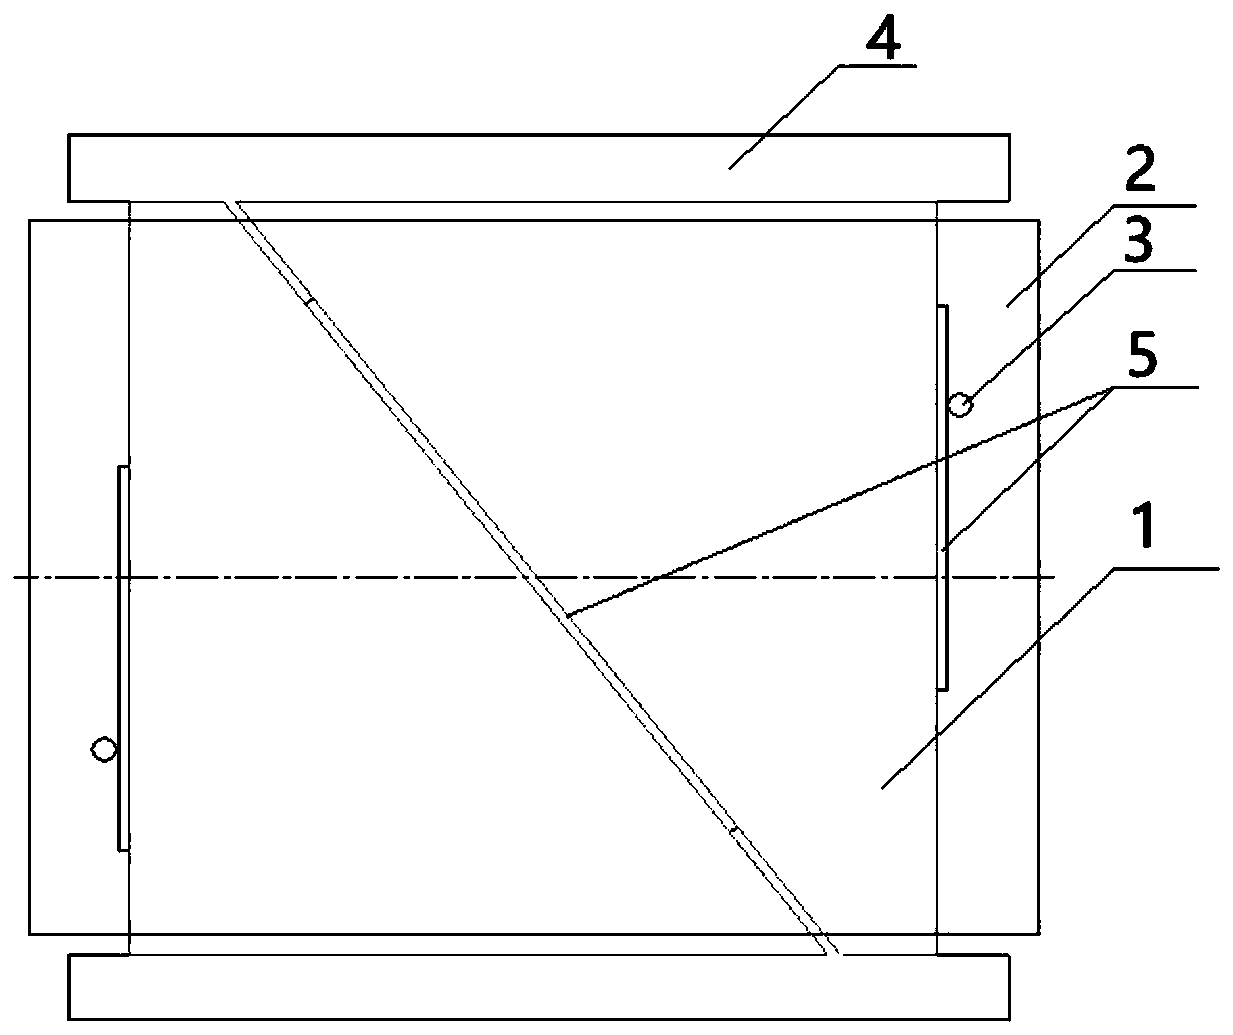 Machining method based on simple clamping of triangular parts